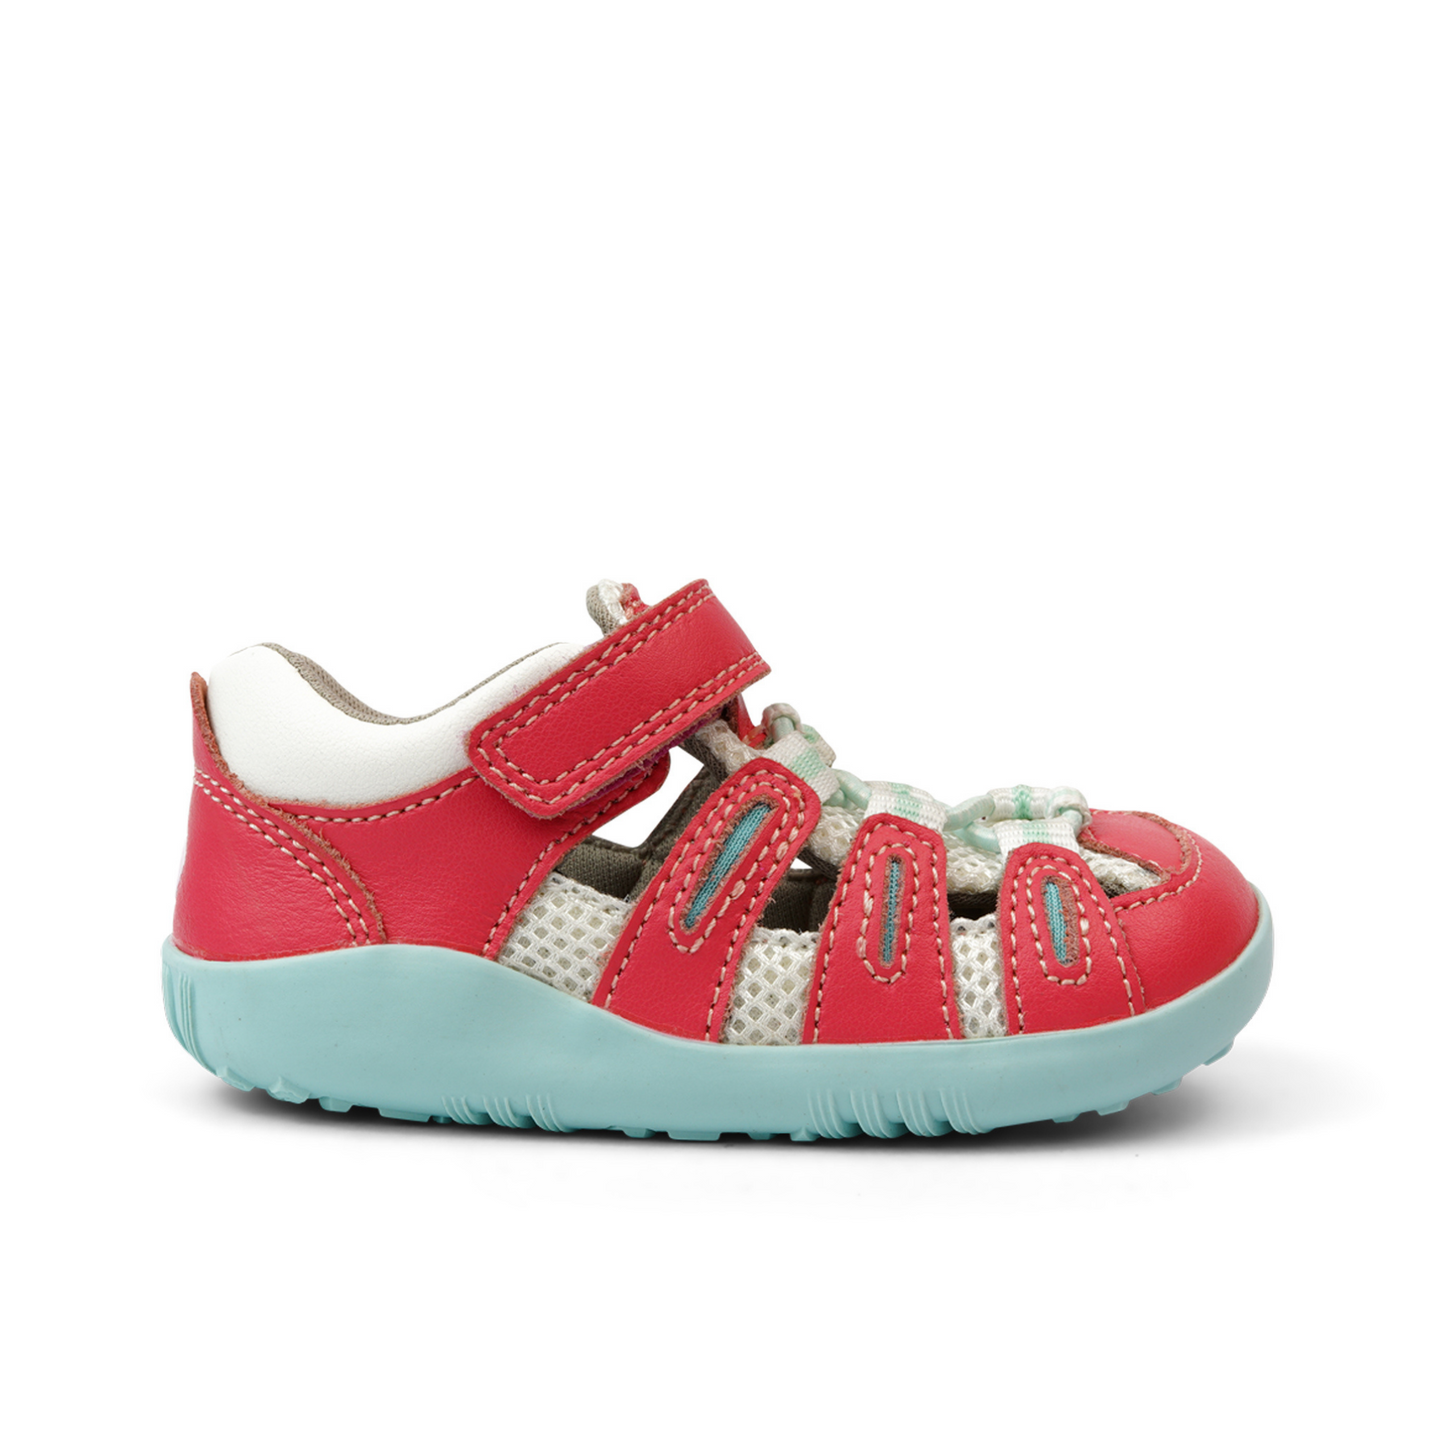 IW Summit Water Safe Sandal in Guava/Mist